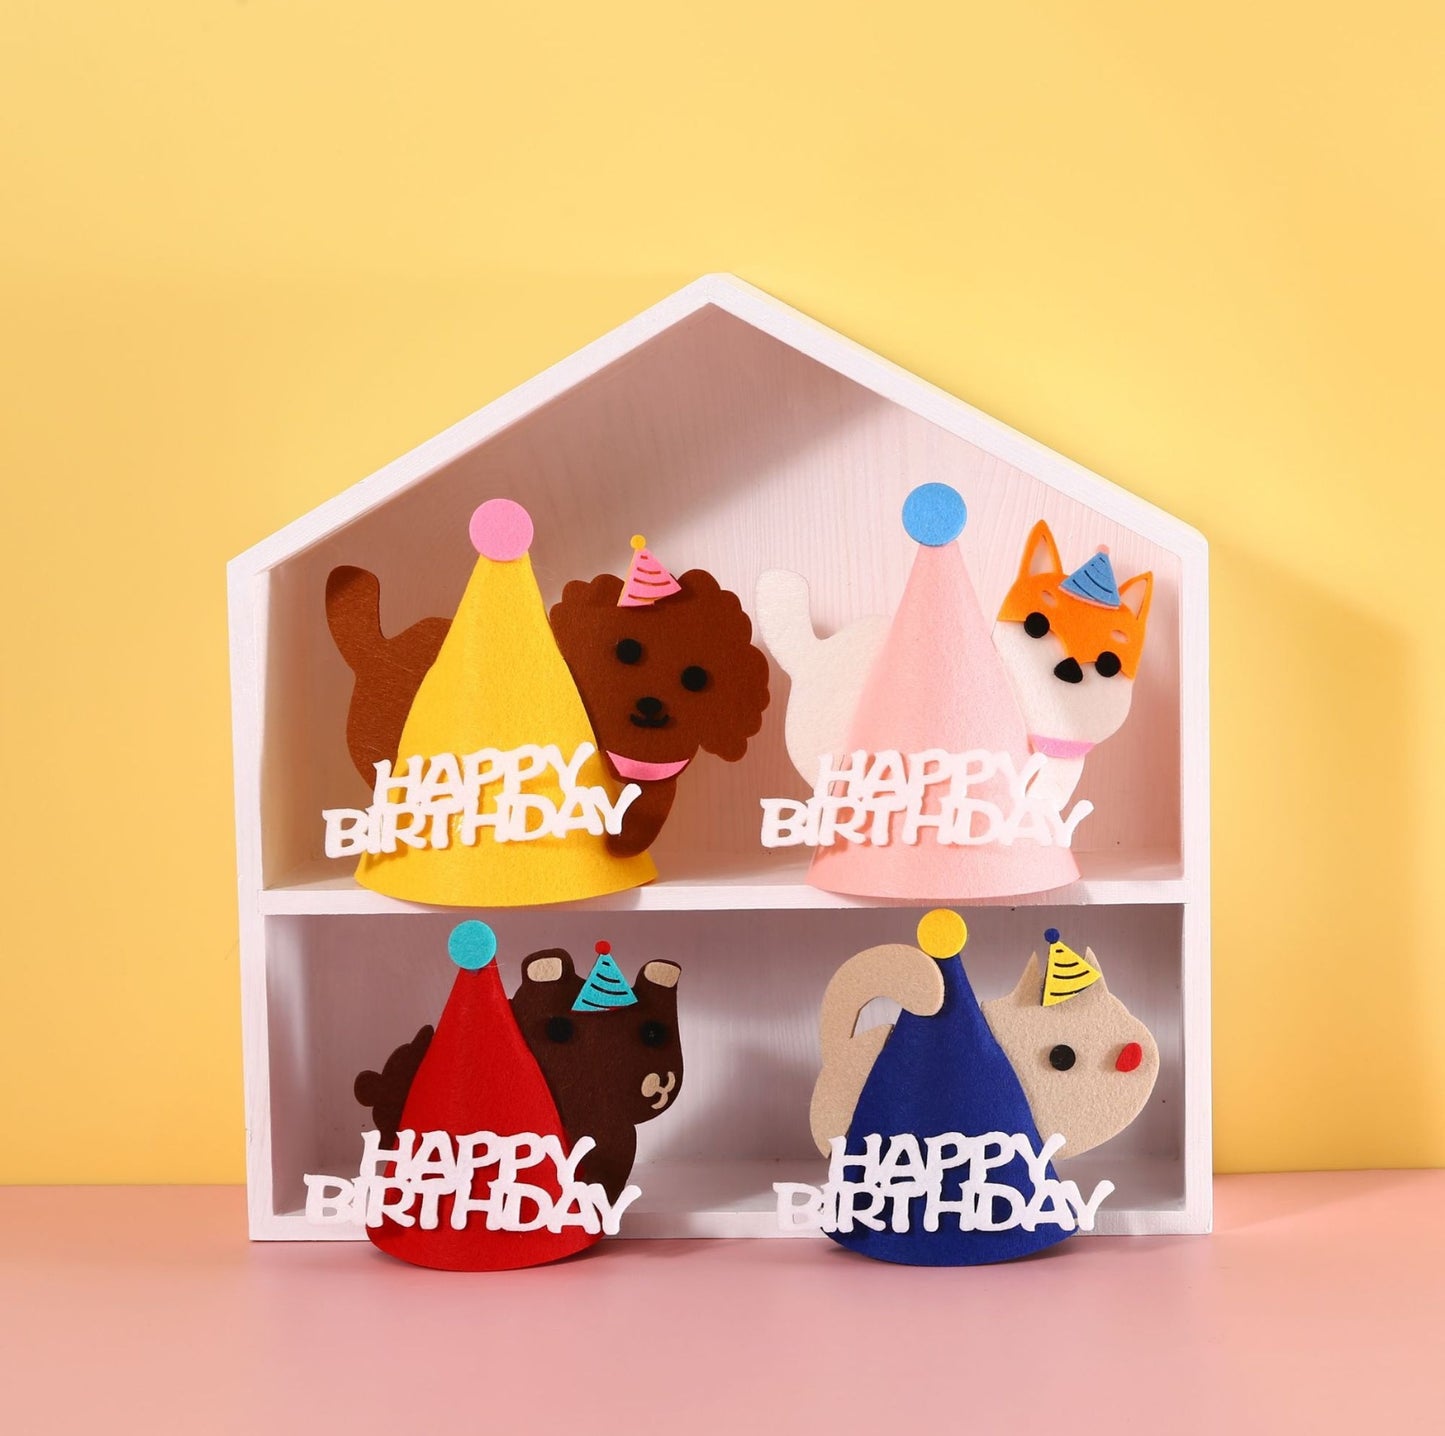 Animal Paw-ty Gear: Adorable Birthday Hat for Pets